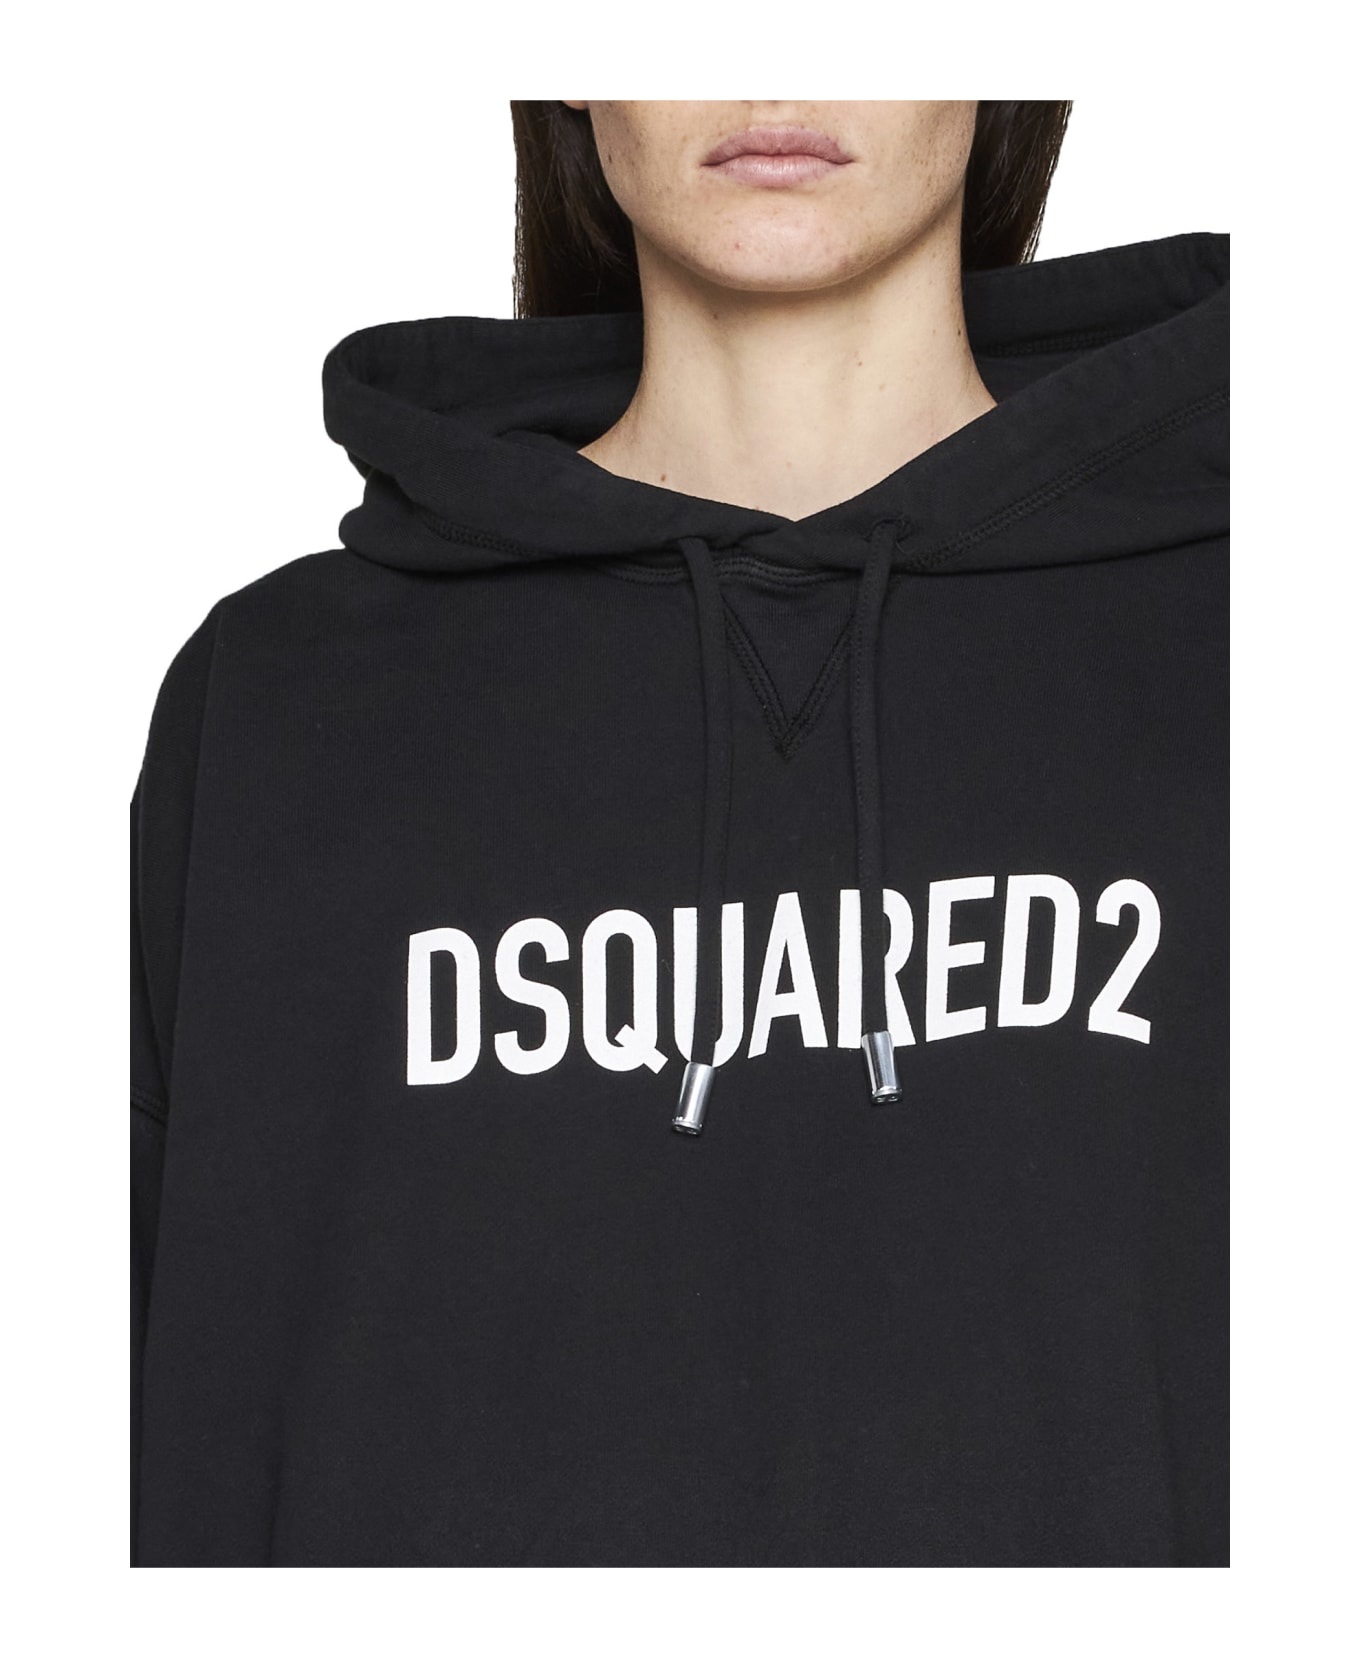 Dsquared2 Hooded Cotton Dress - Black